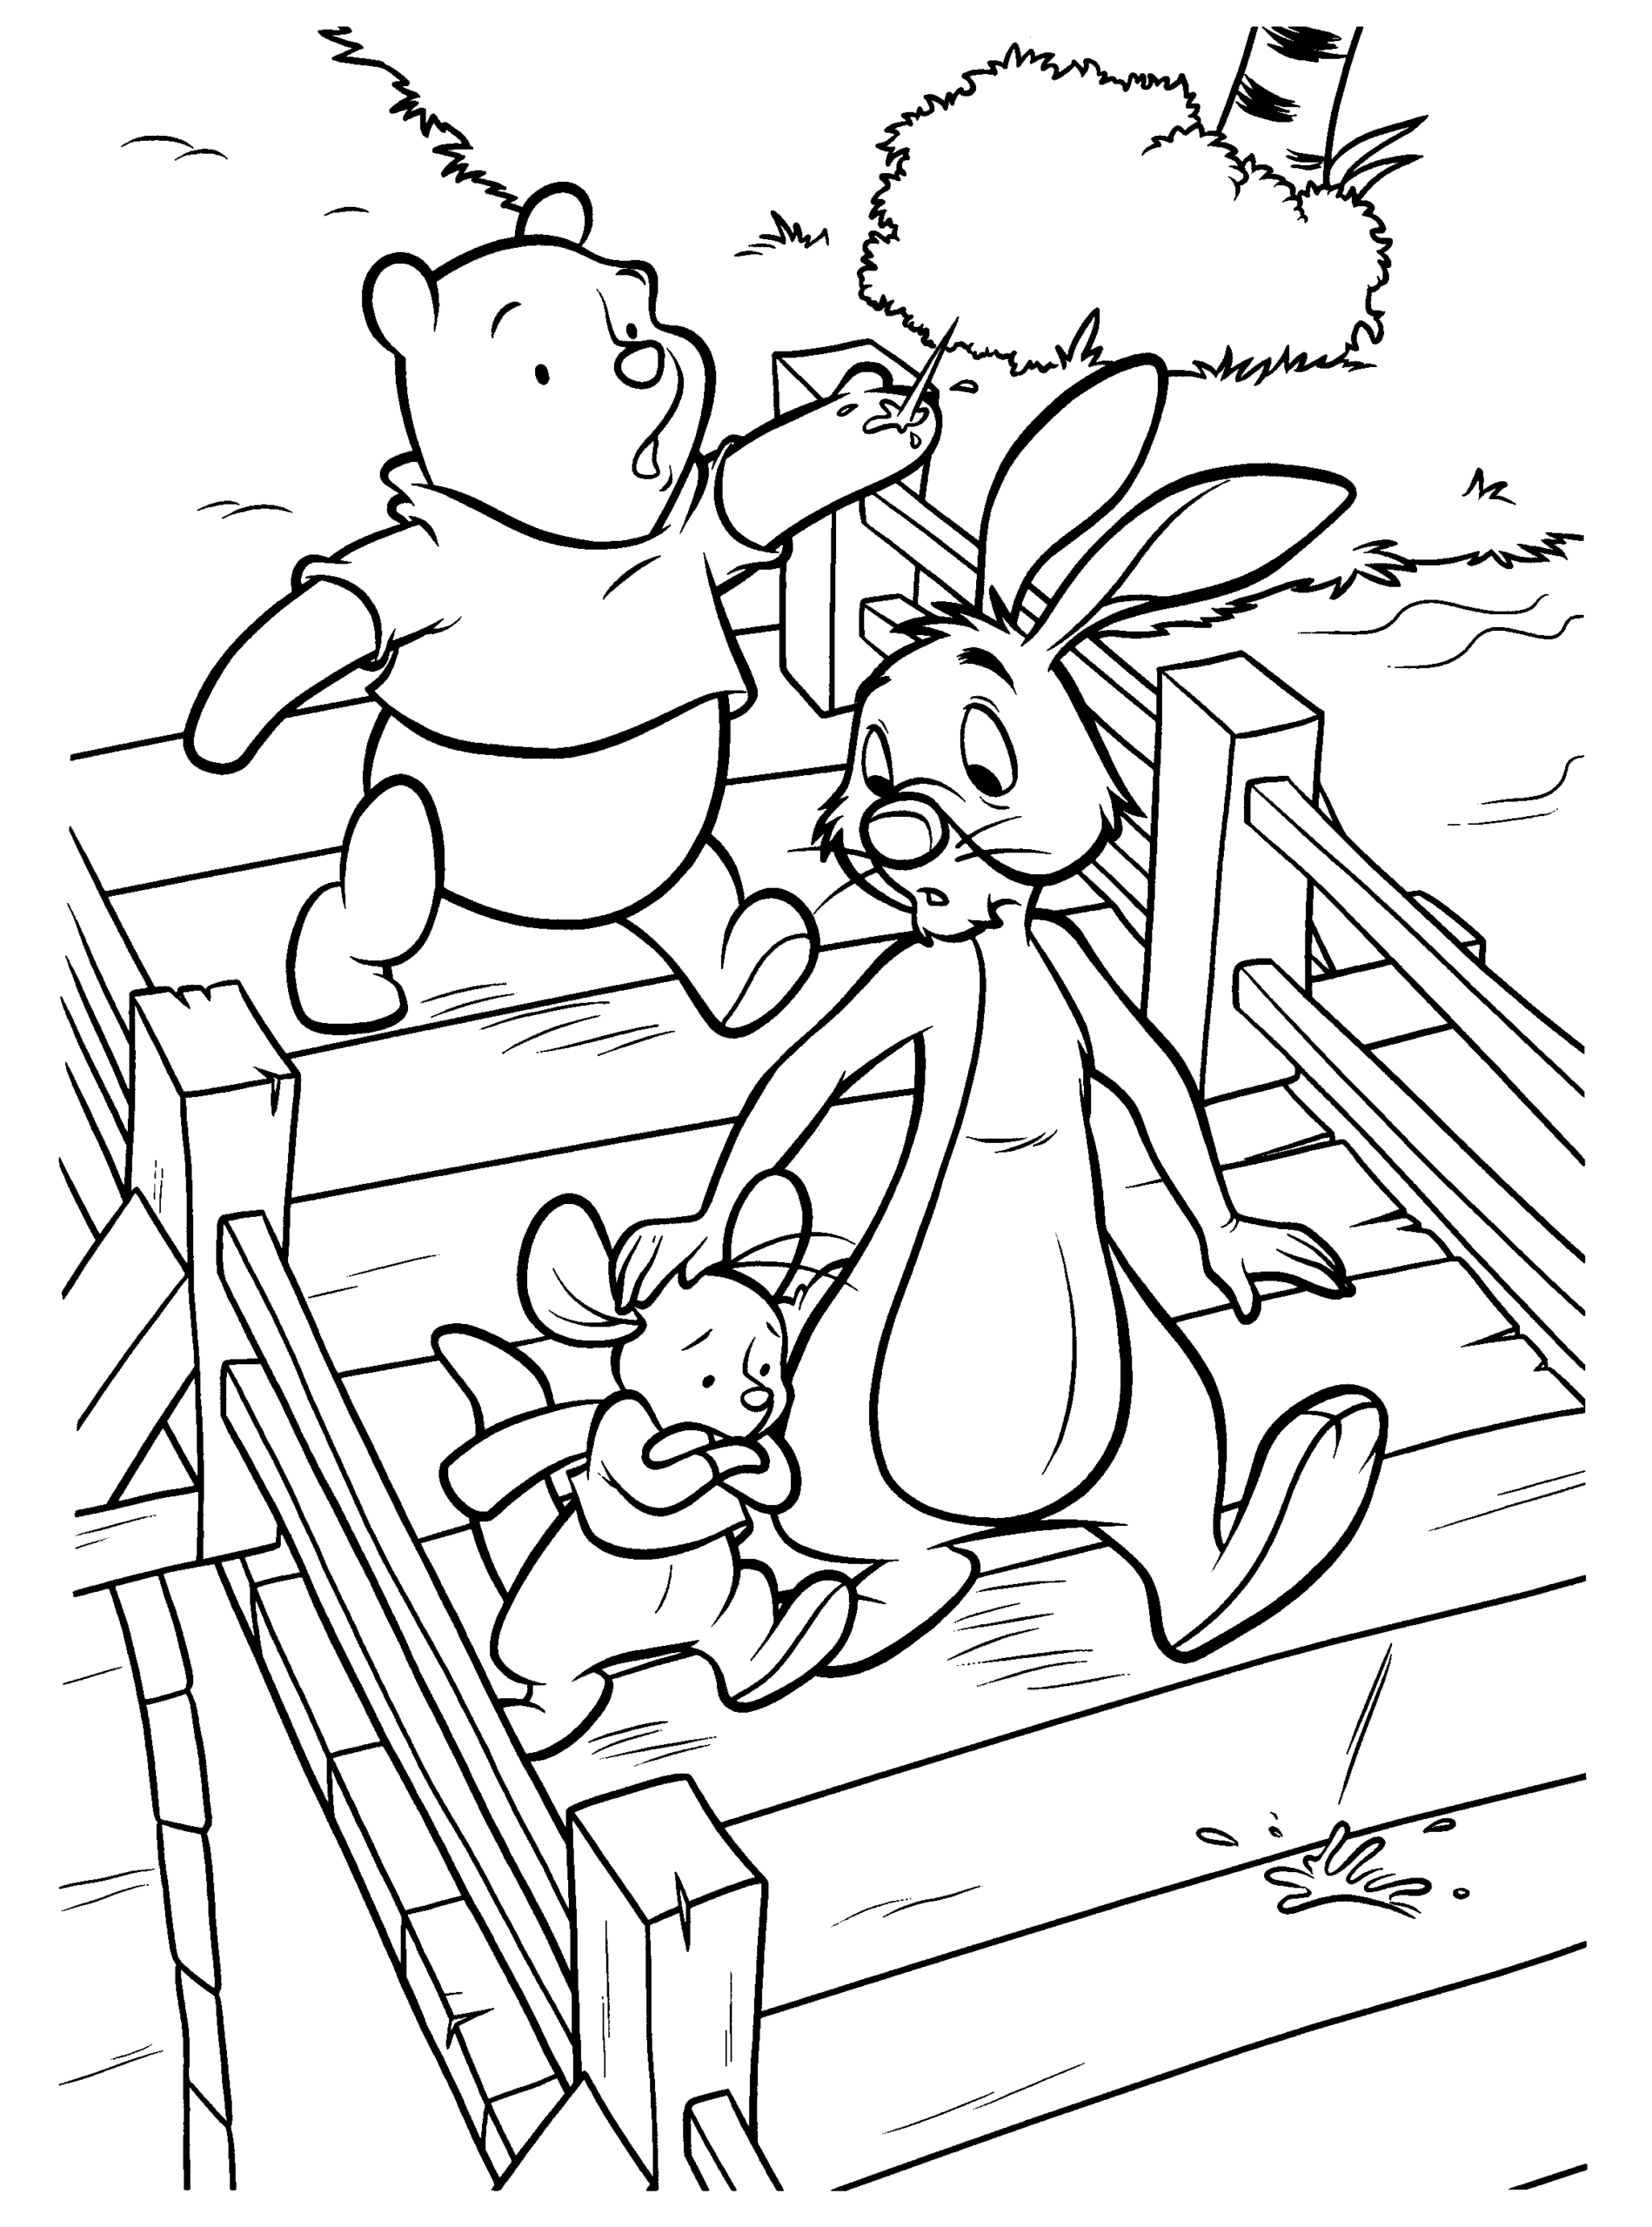 Winnie the Pooh Coloring Pages Cartoons winnie the pooh 15 Printable 2020 7106 Coloring4free